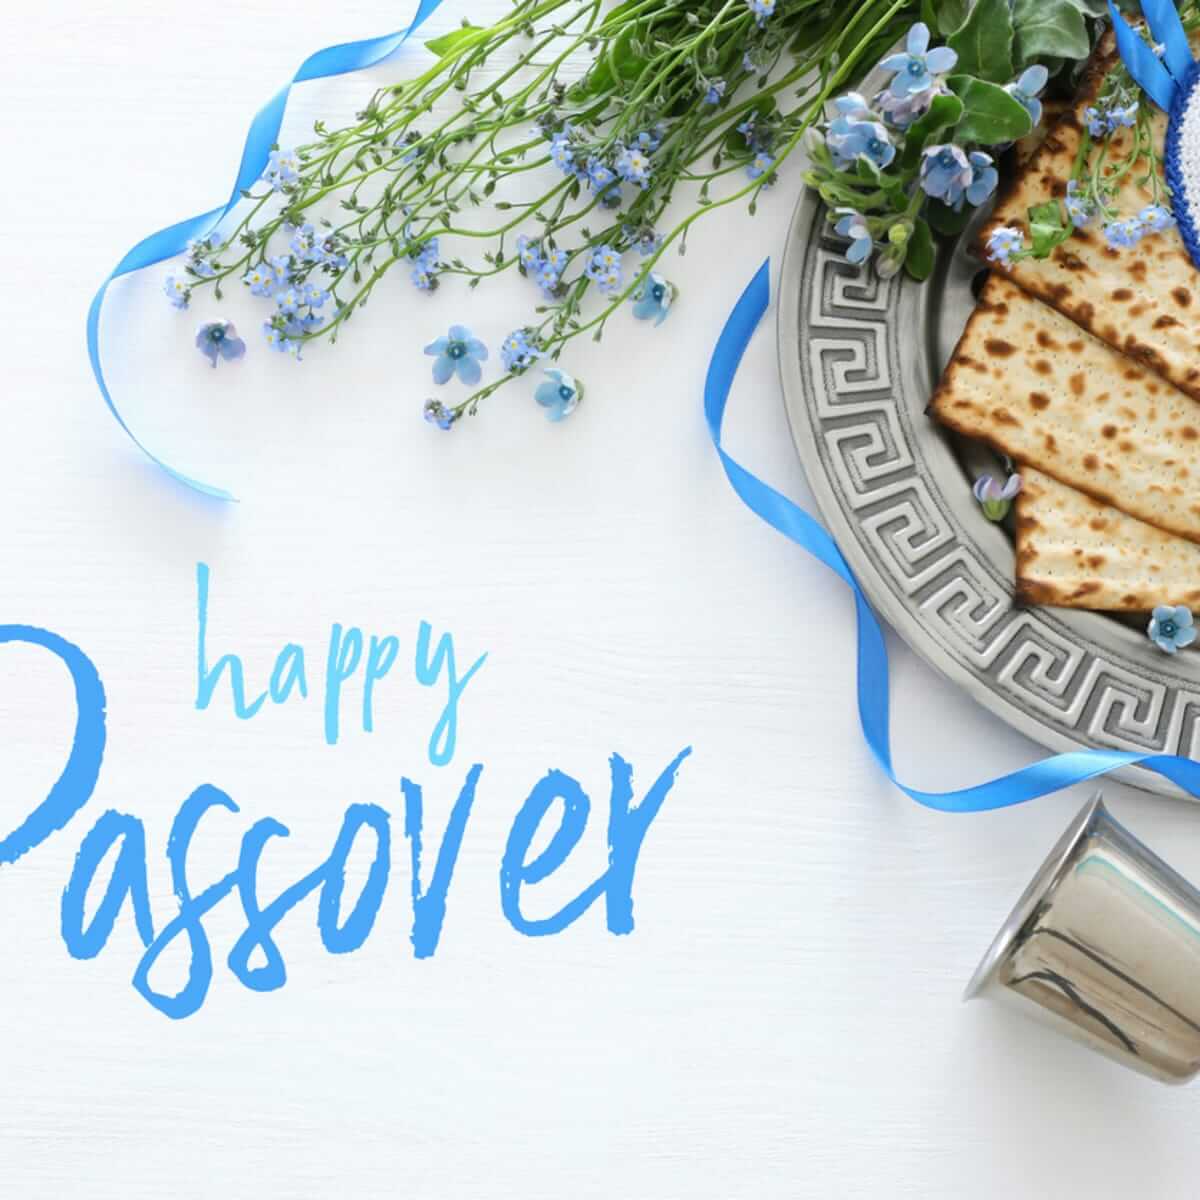 Passover greetings and wishes